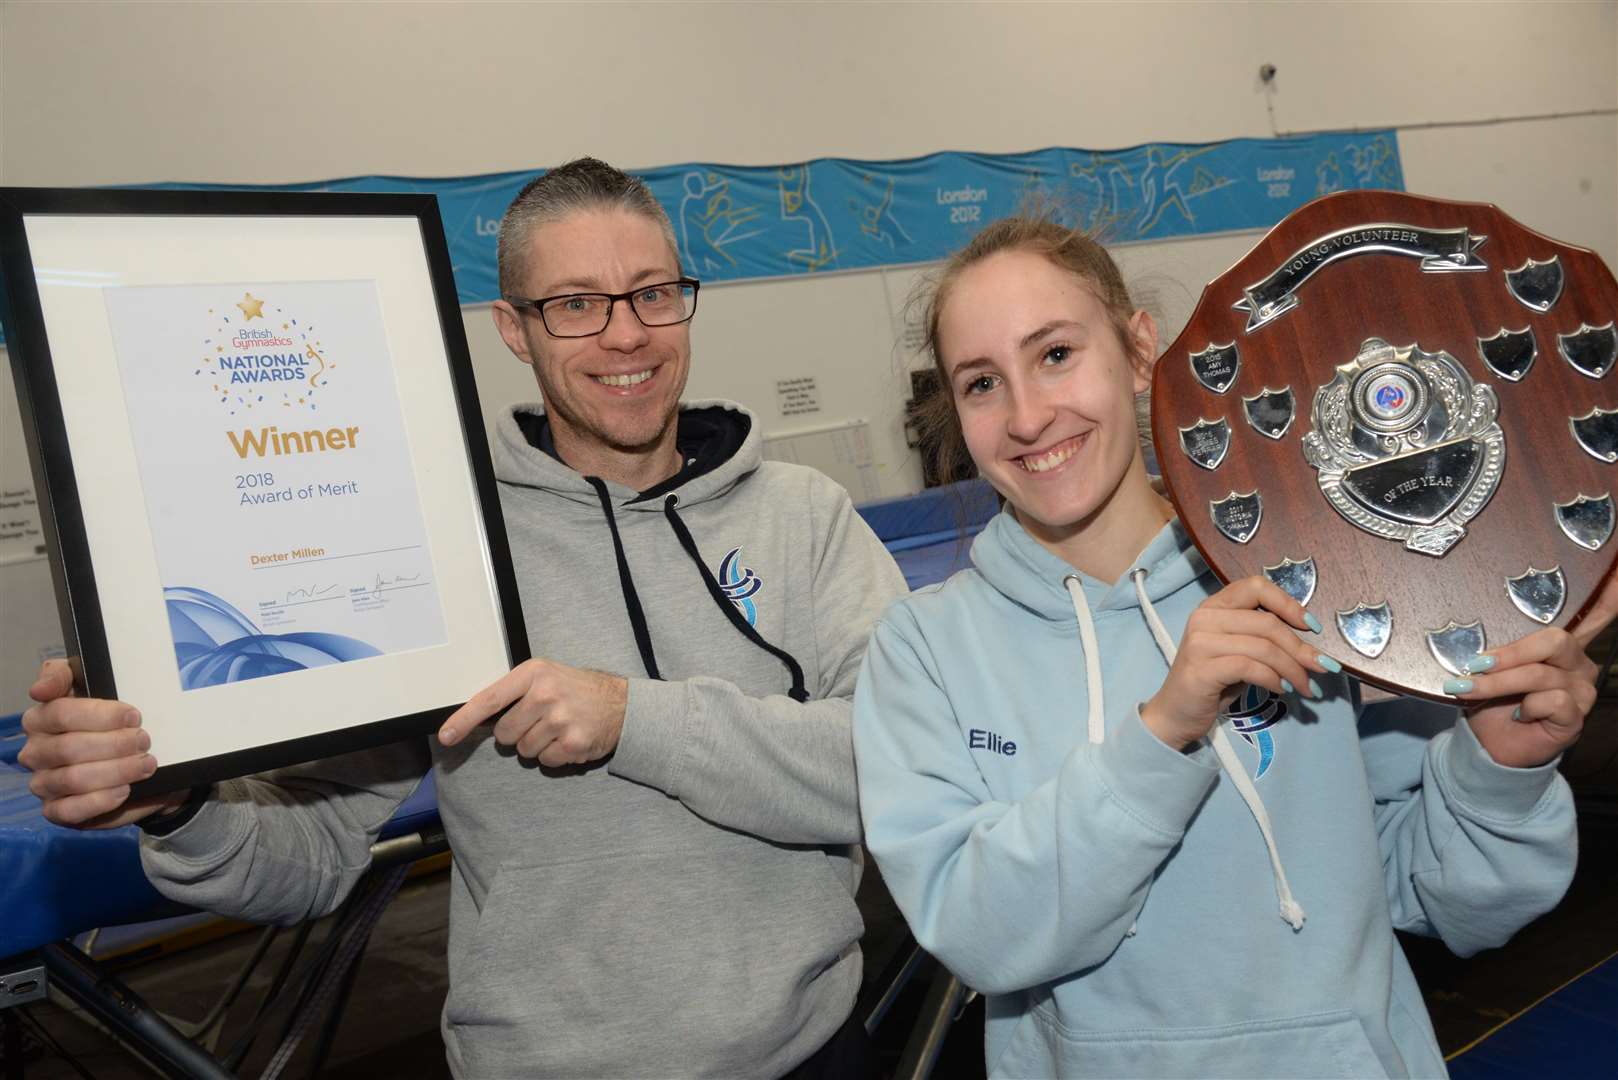 Director of coaching Dexter Millen and coach Ellie Passfield of the Aire Trampolining Club